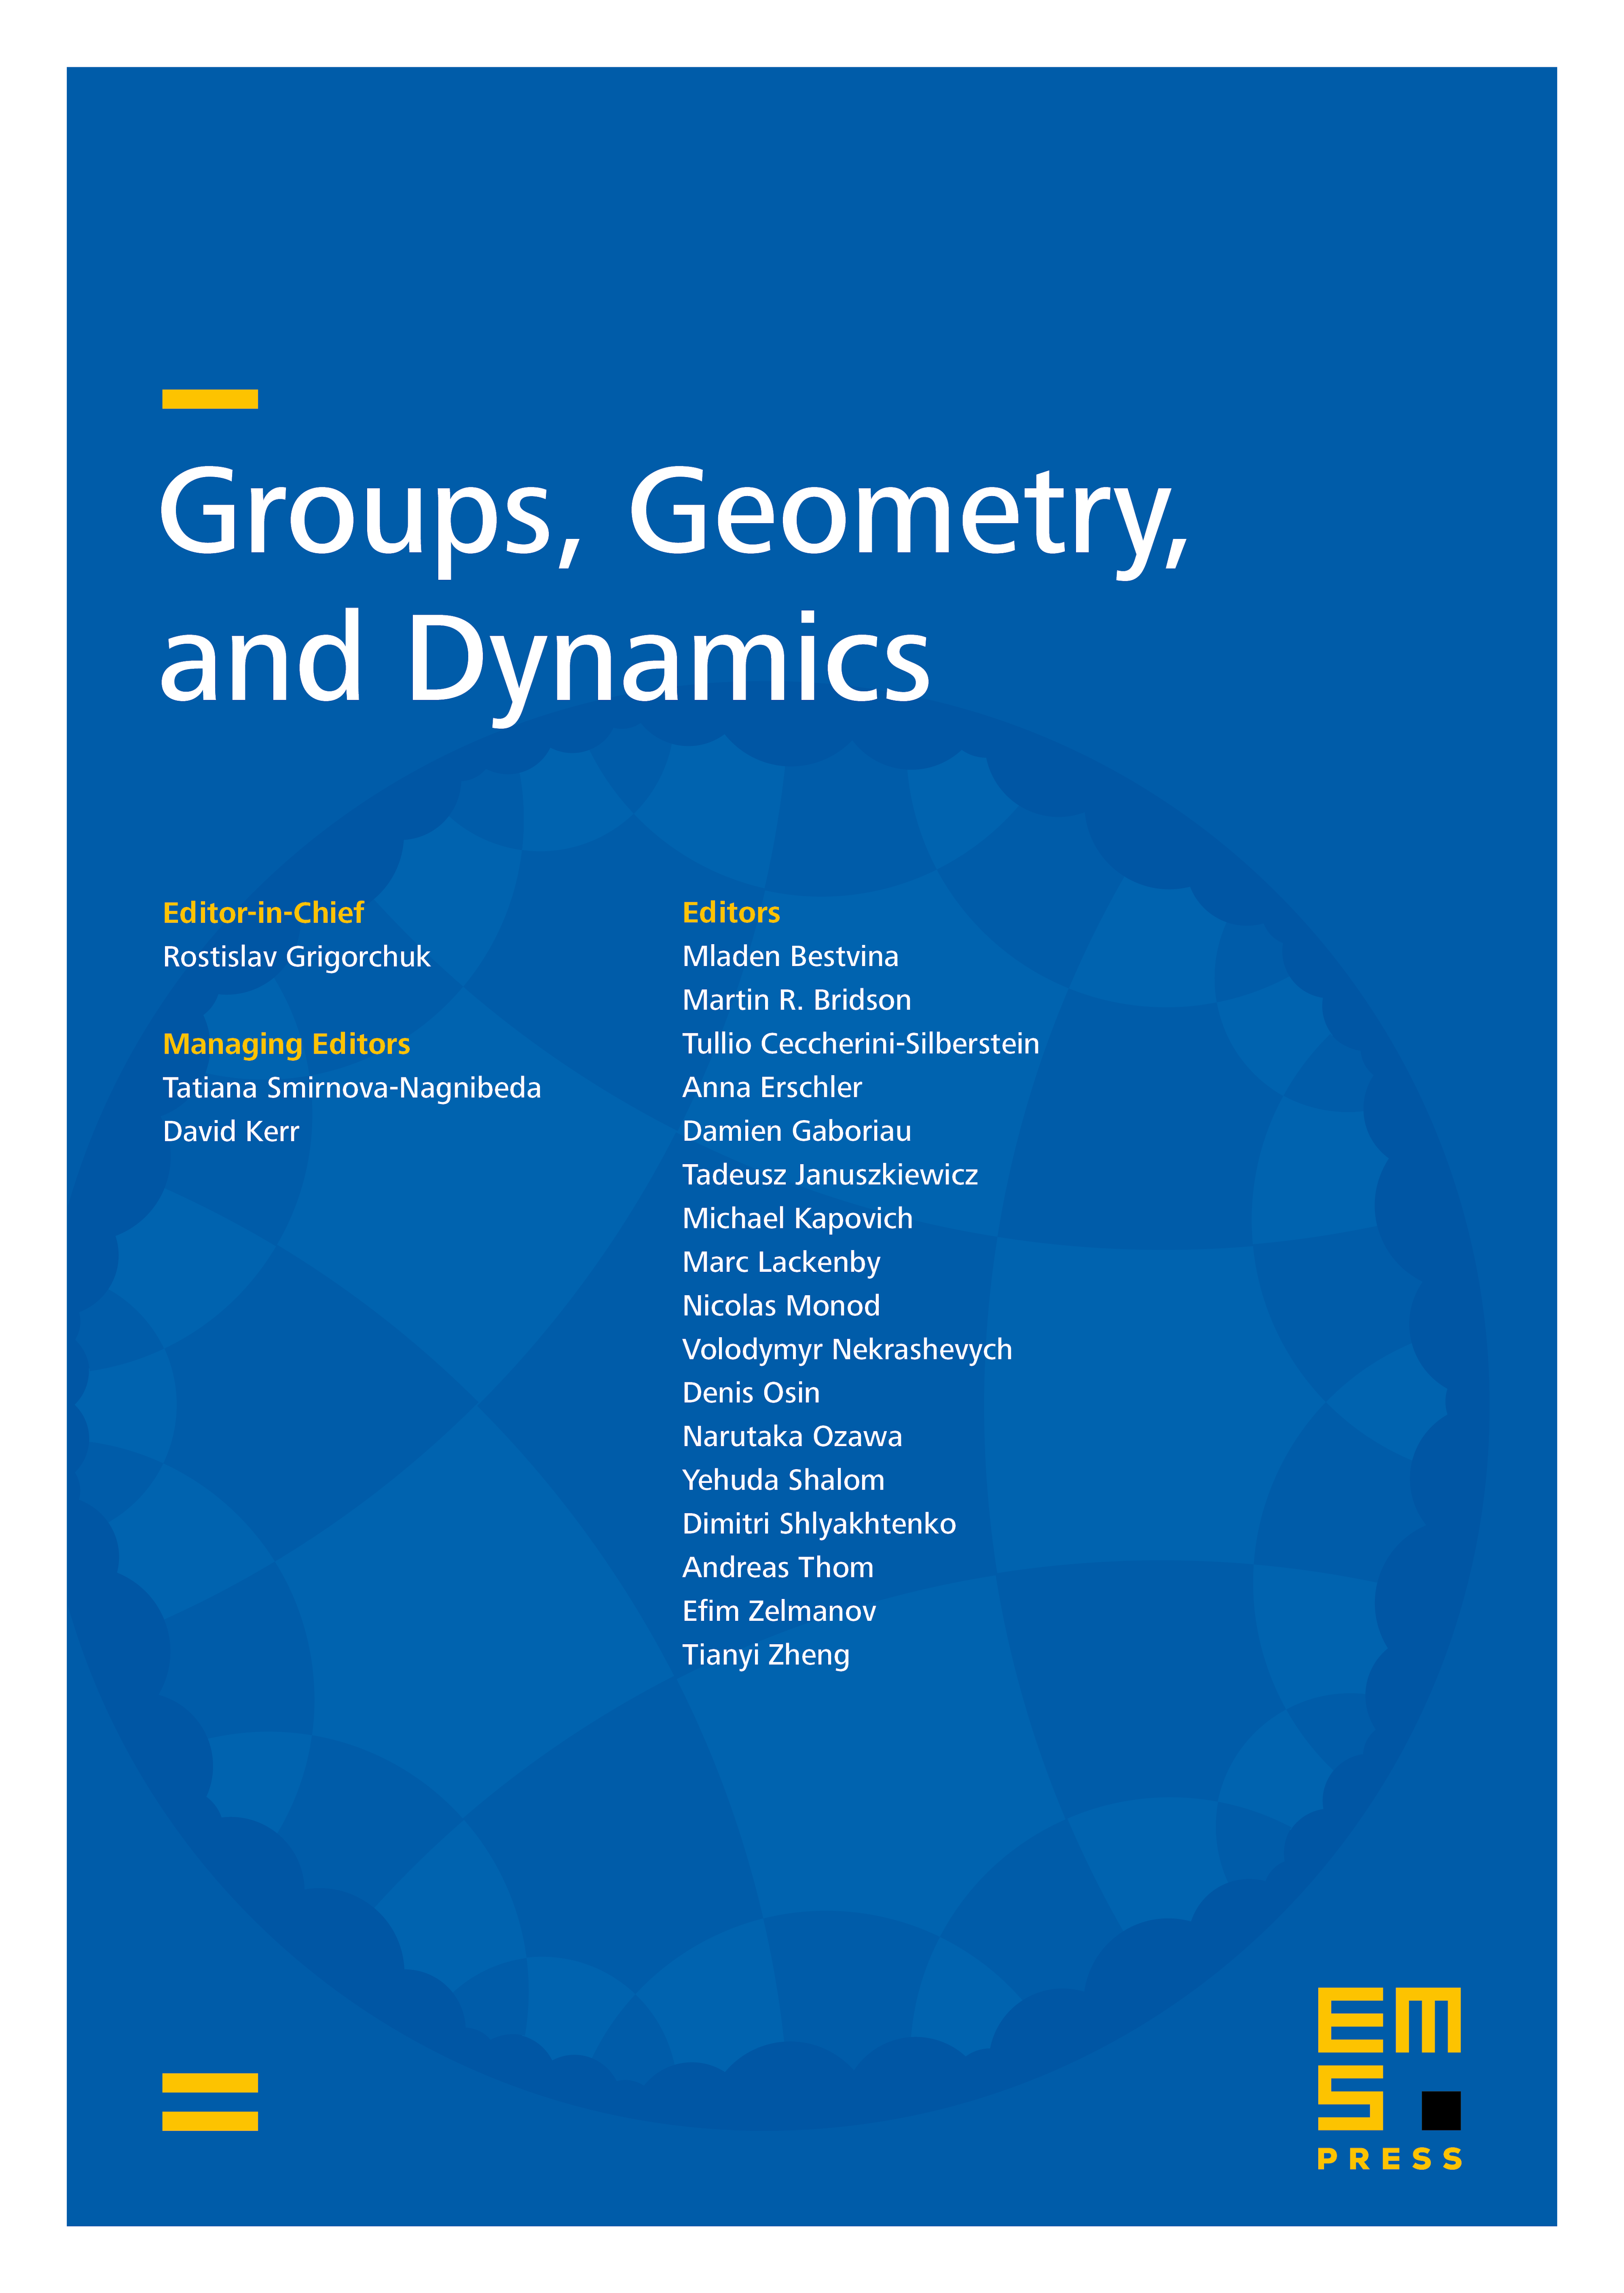 Some virtual limit groups cover